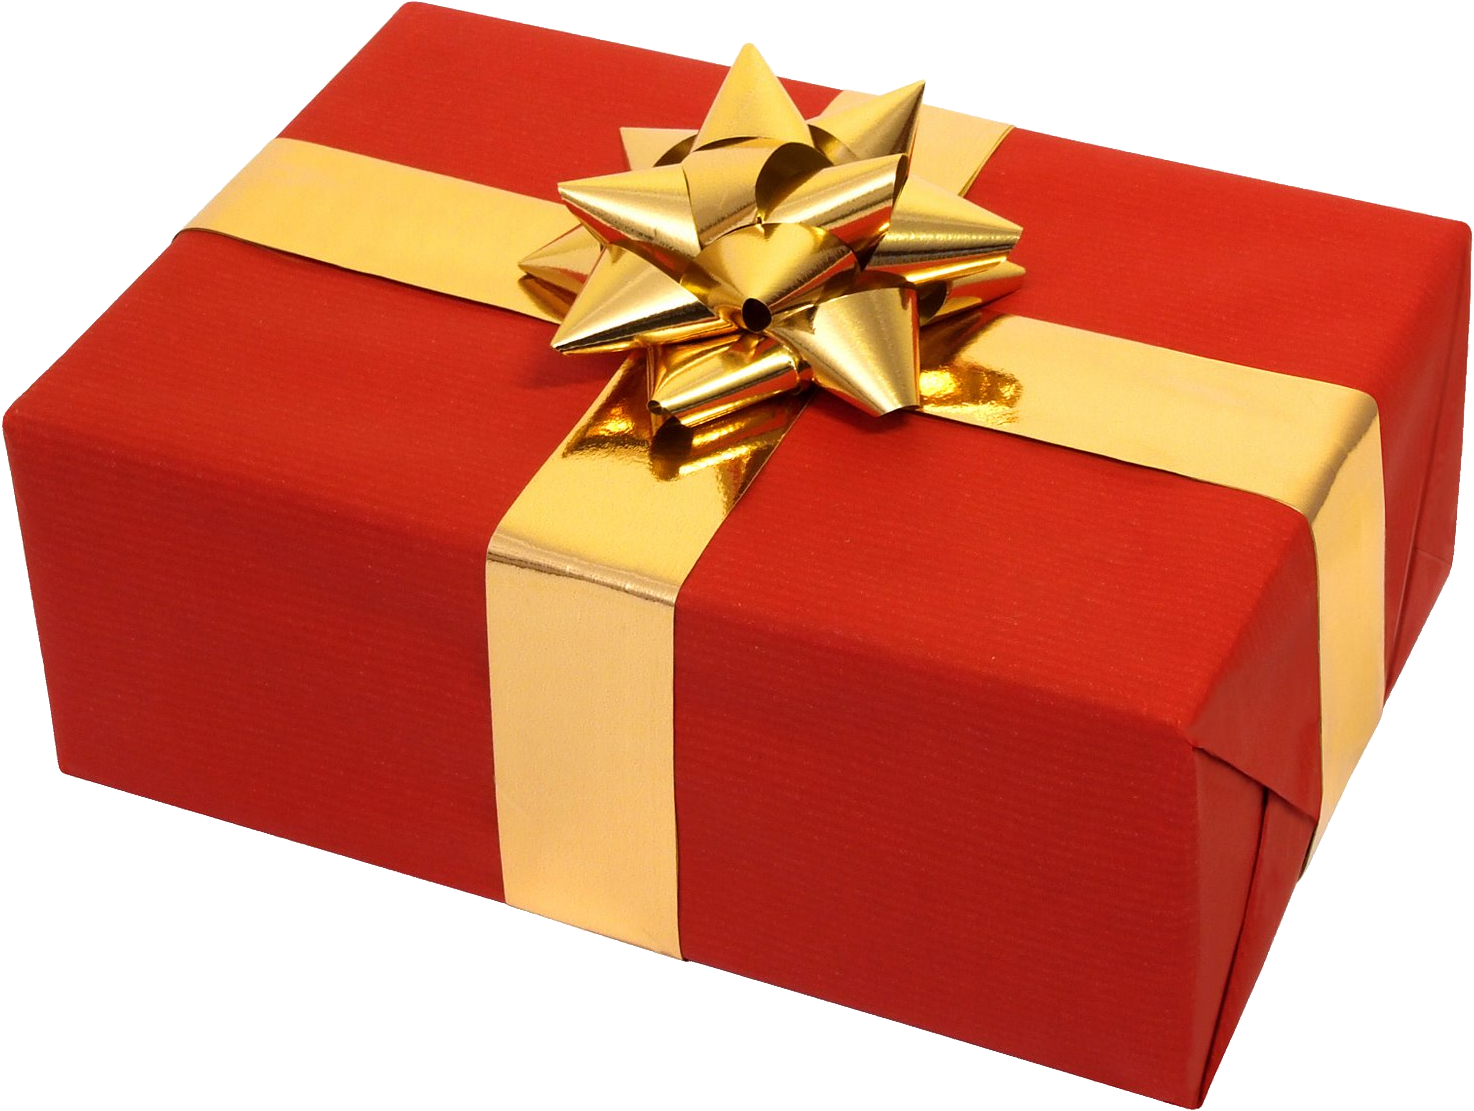 Gift Box Png Image - Gift, Transparent background PNG HD thumbnail